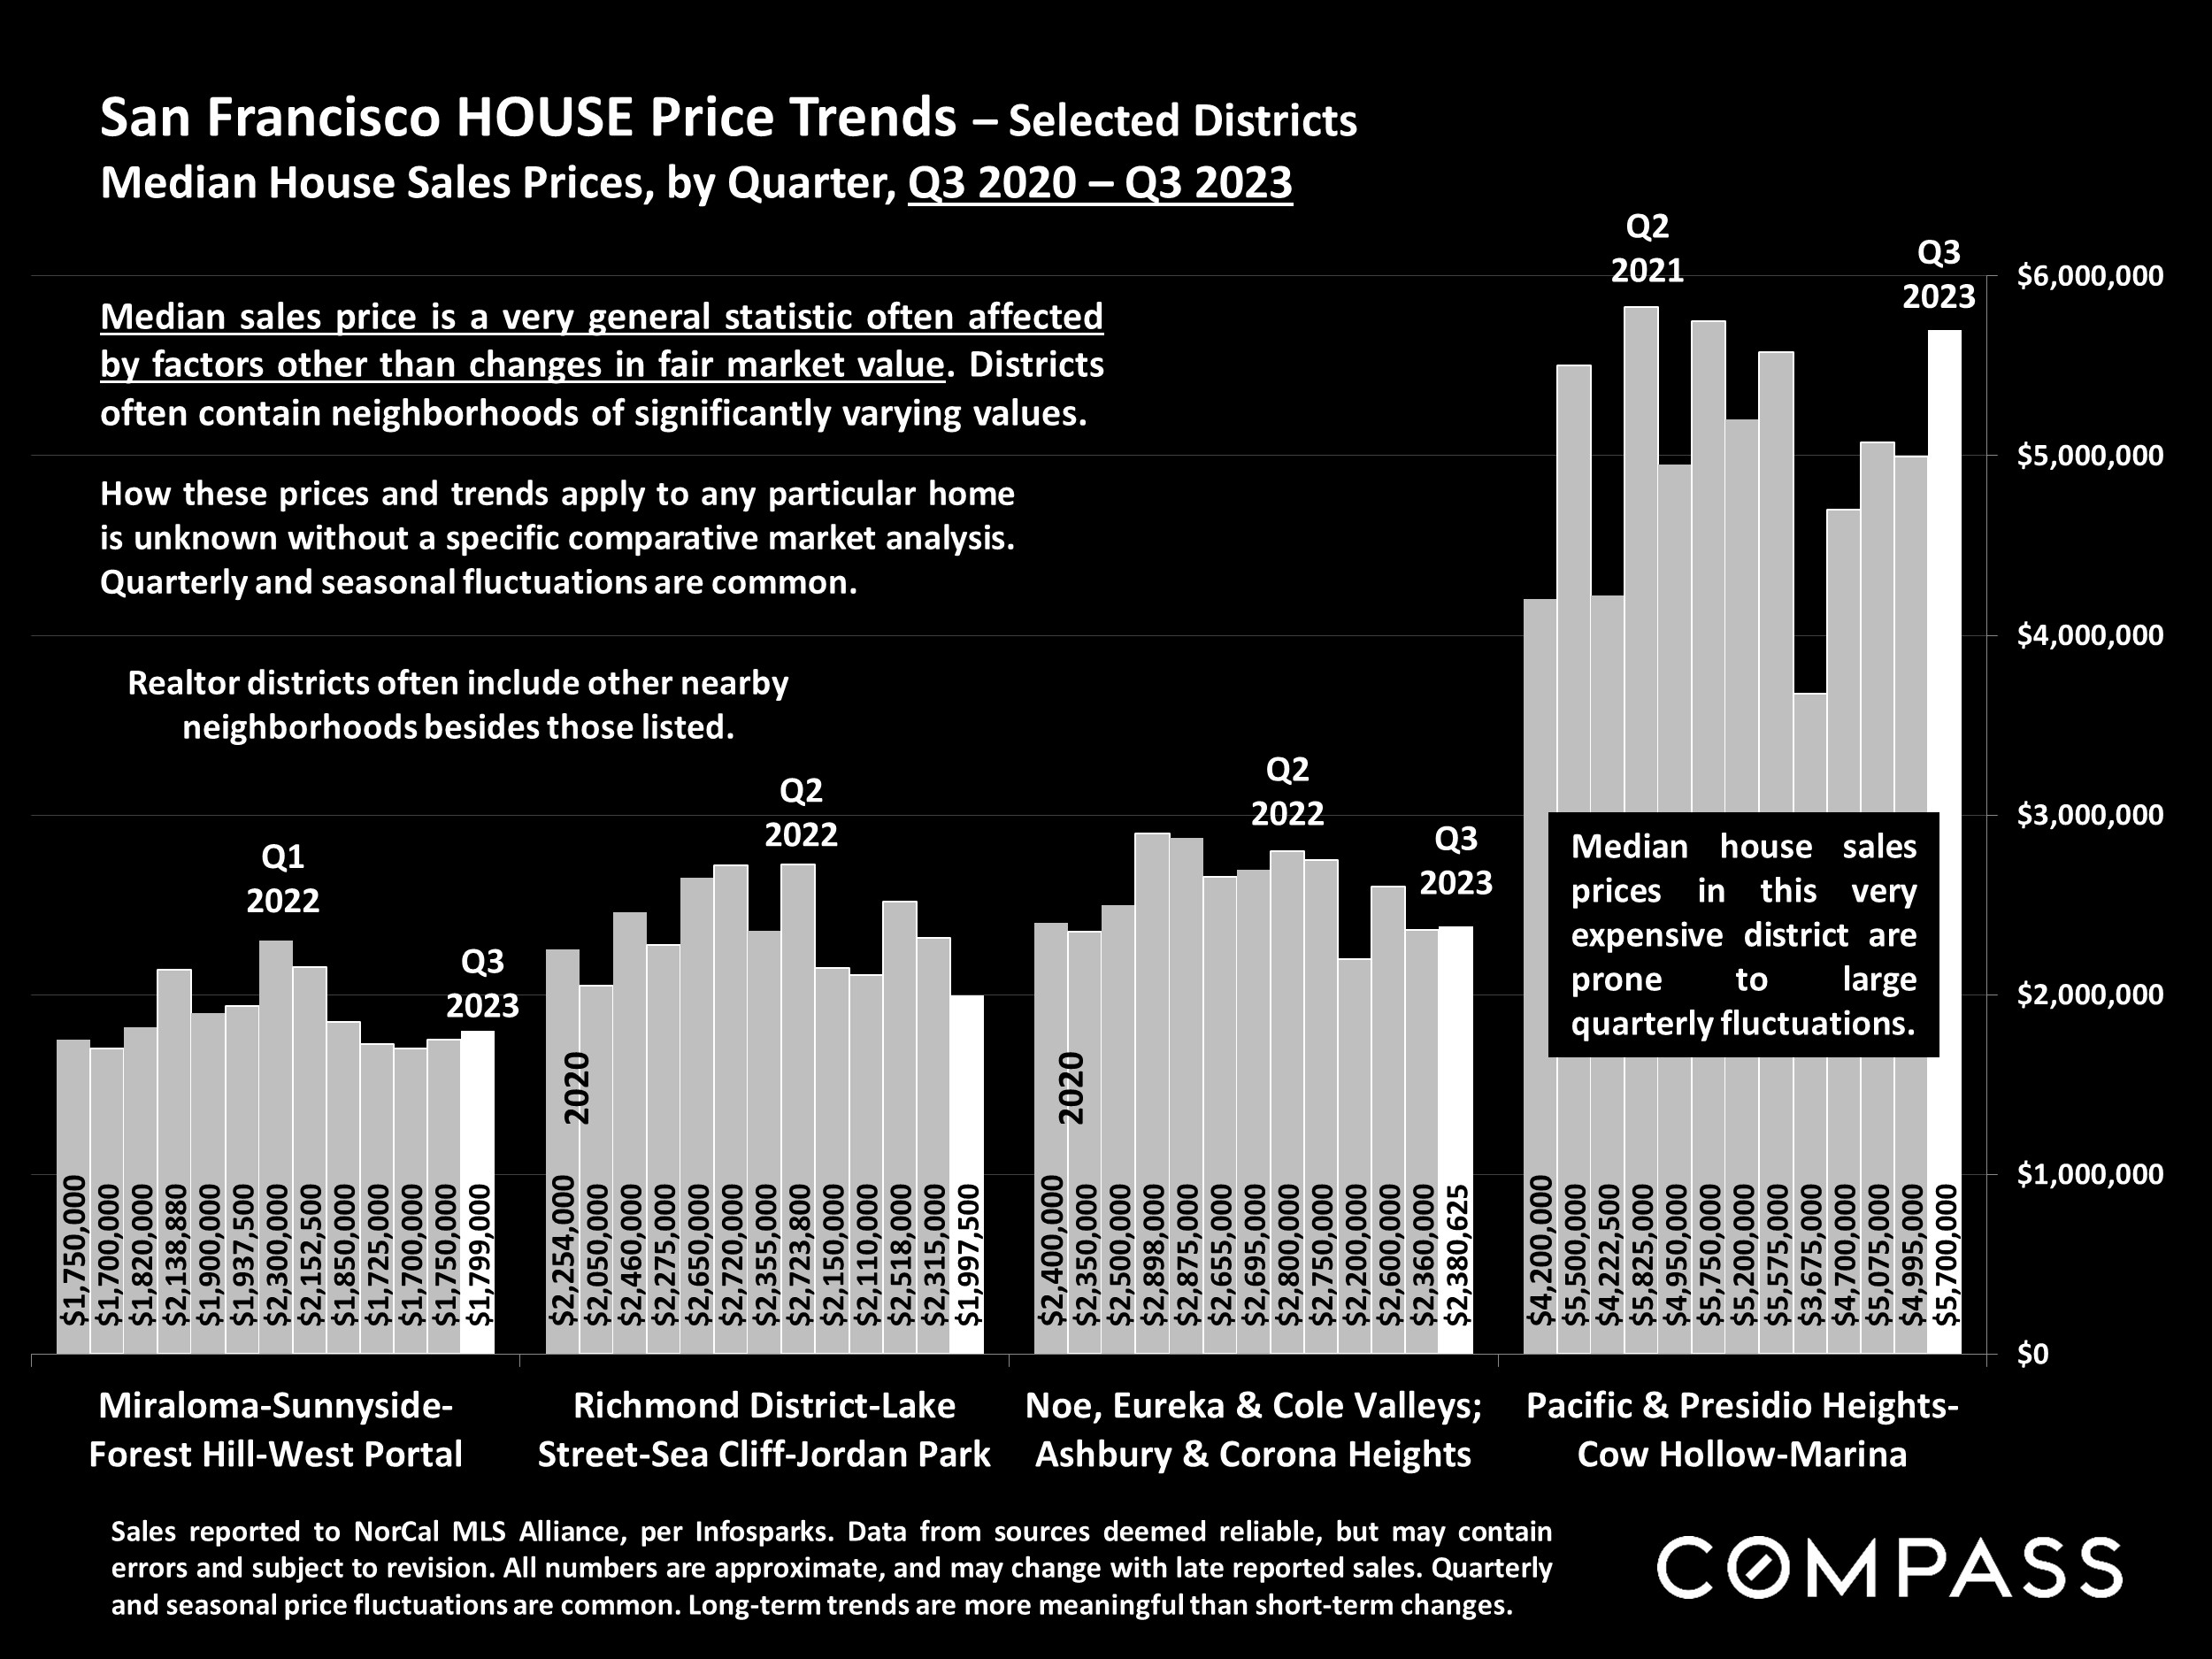 San Francisco HOUSE Price Trends - Selected Districts Median House Sales Prices, by Quarter, Q3 2020 - Q3 2023